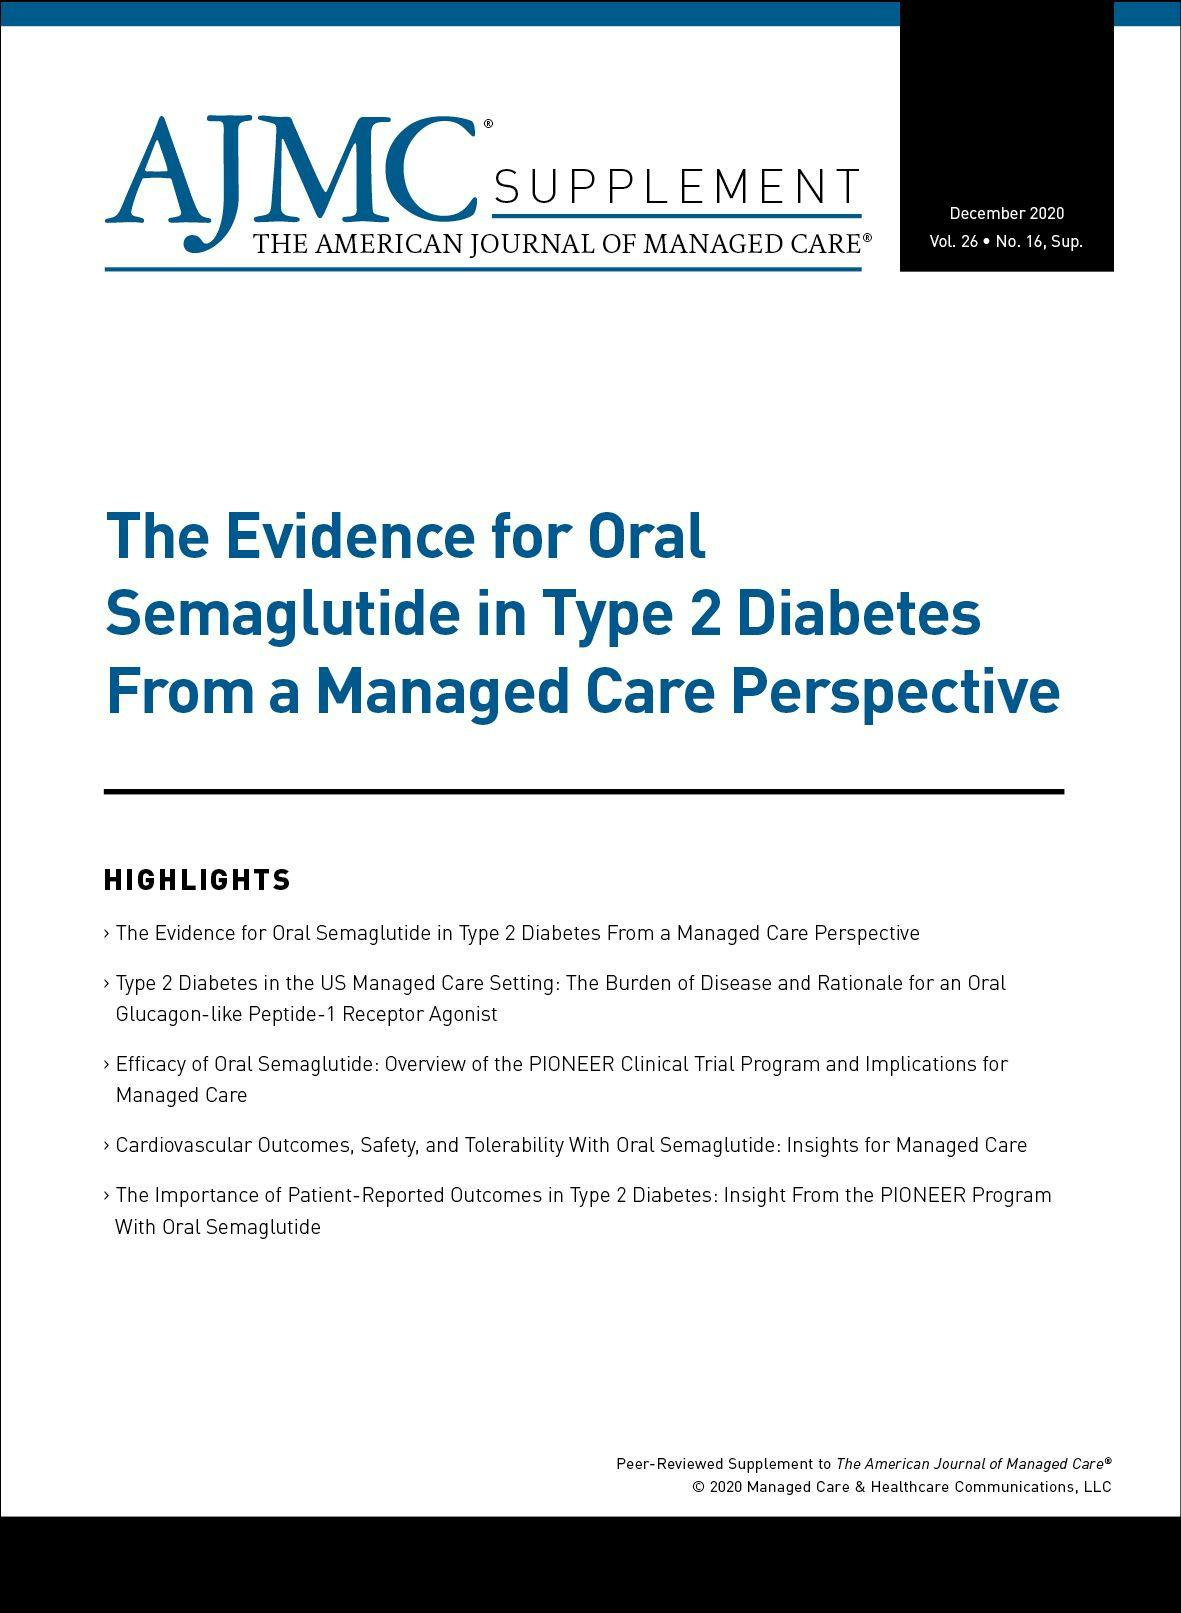 The Evidence for Oral Semaglutide in Type 2 Diabetes From a Managed Care Perspective